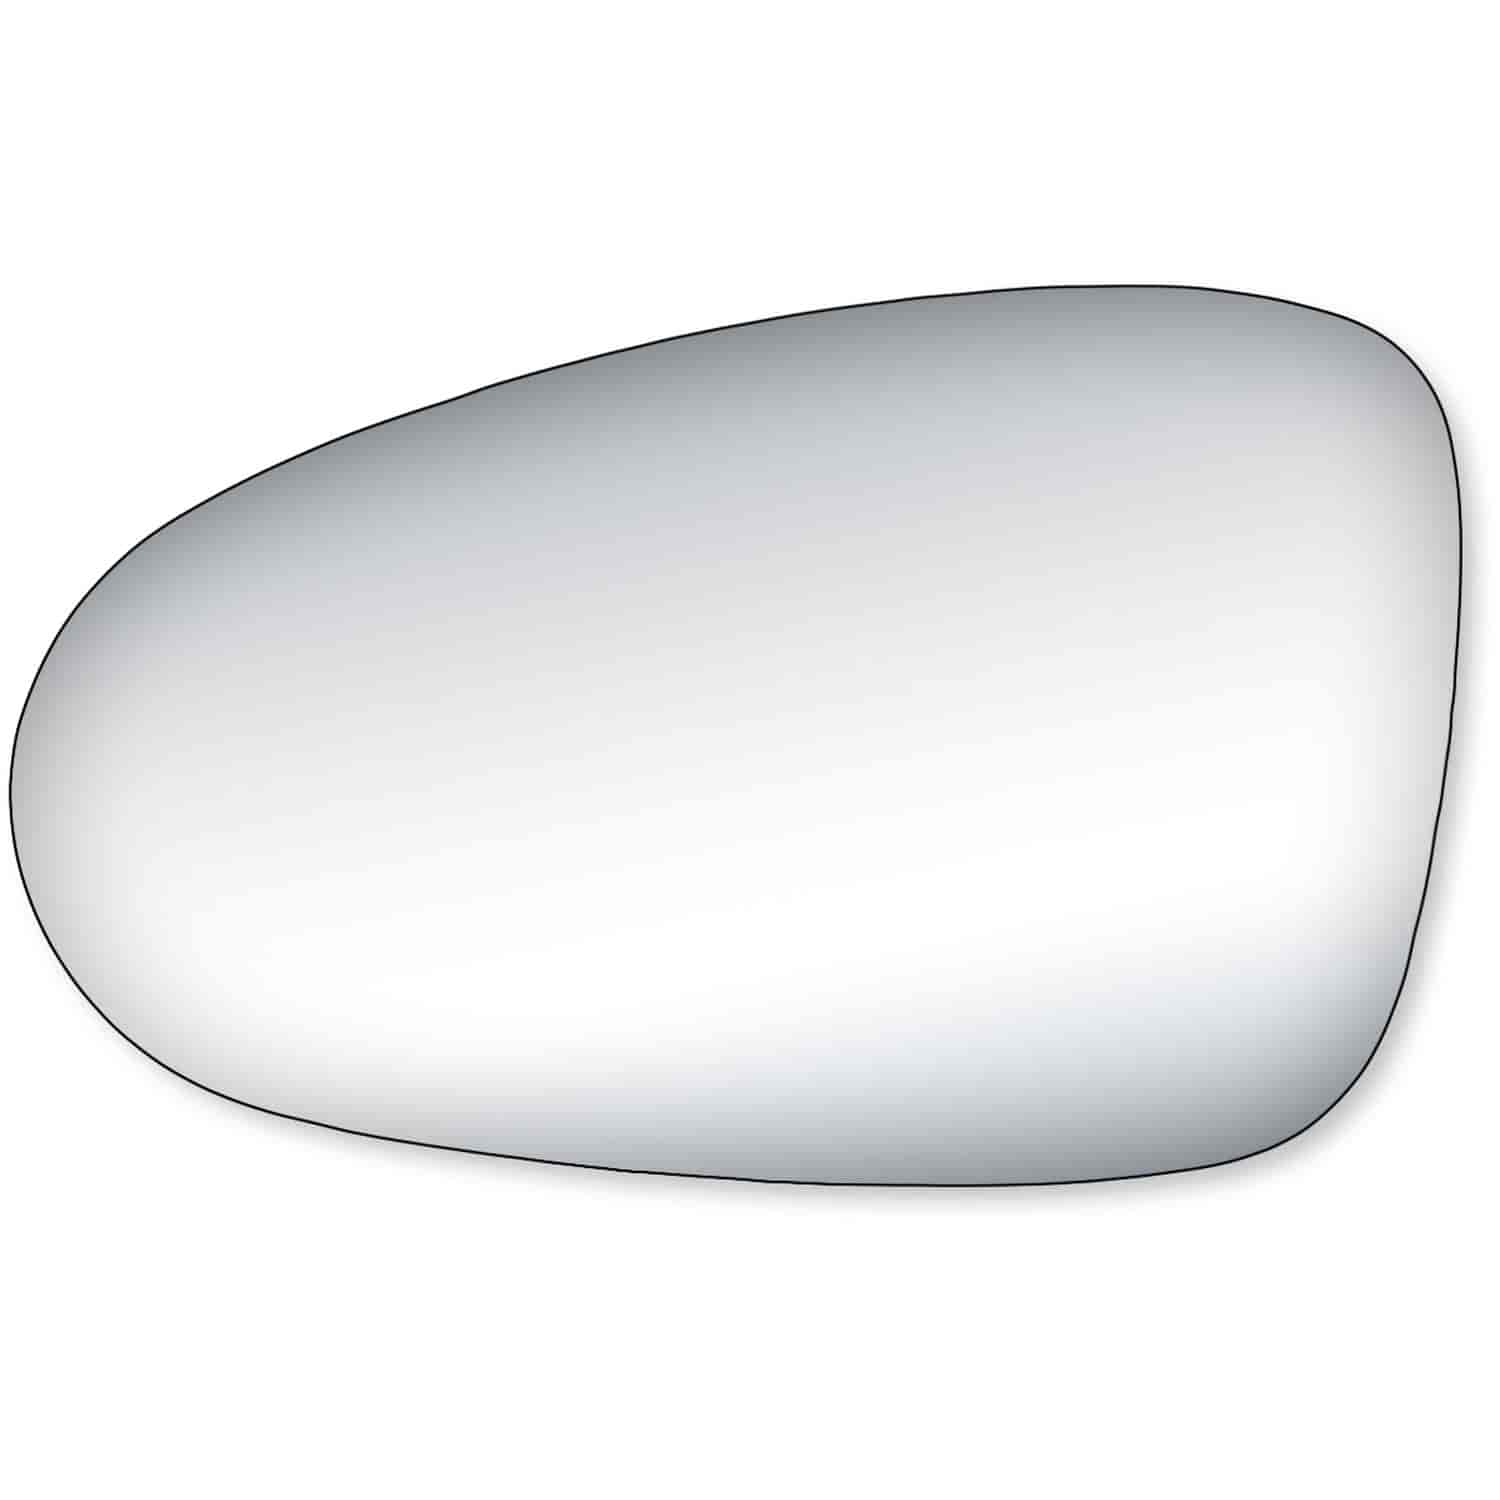 Replacement Glass for 02-06 Altima Sedan the glass